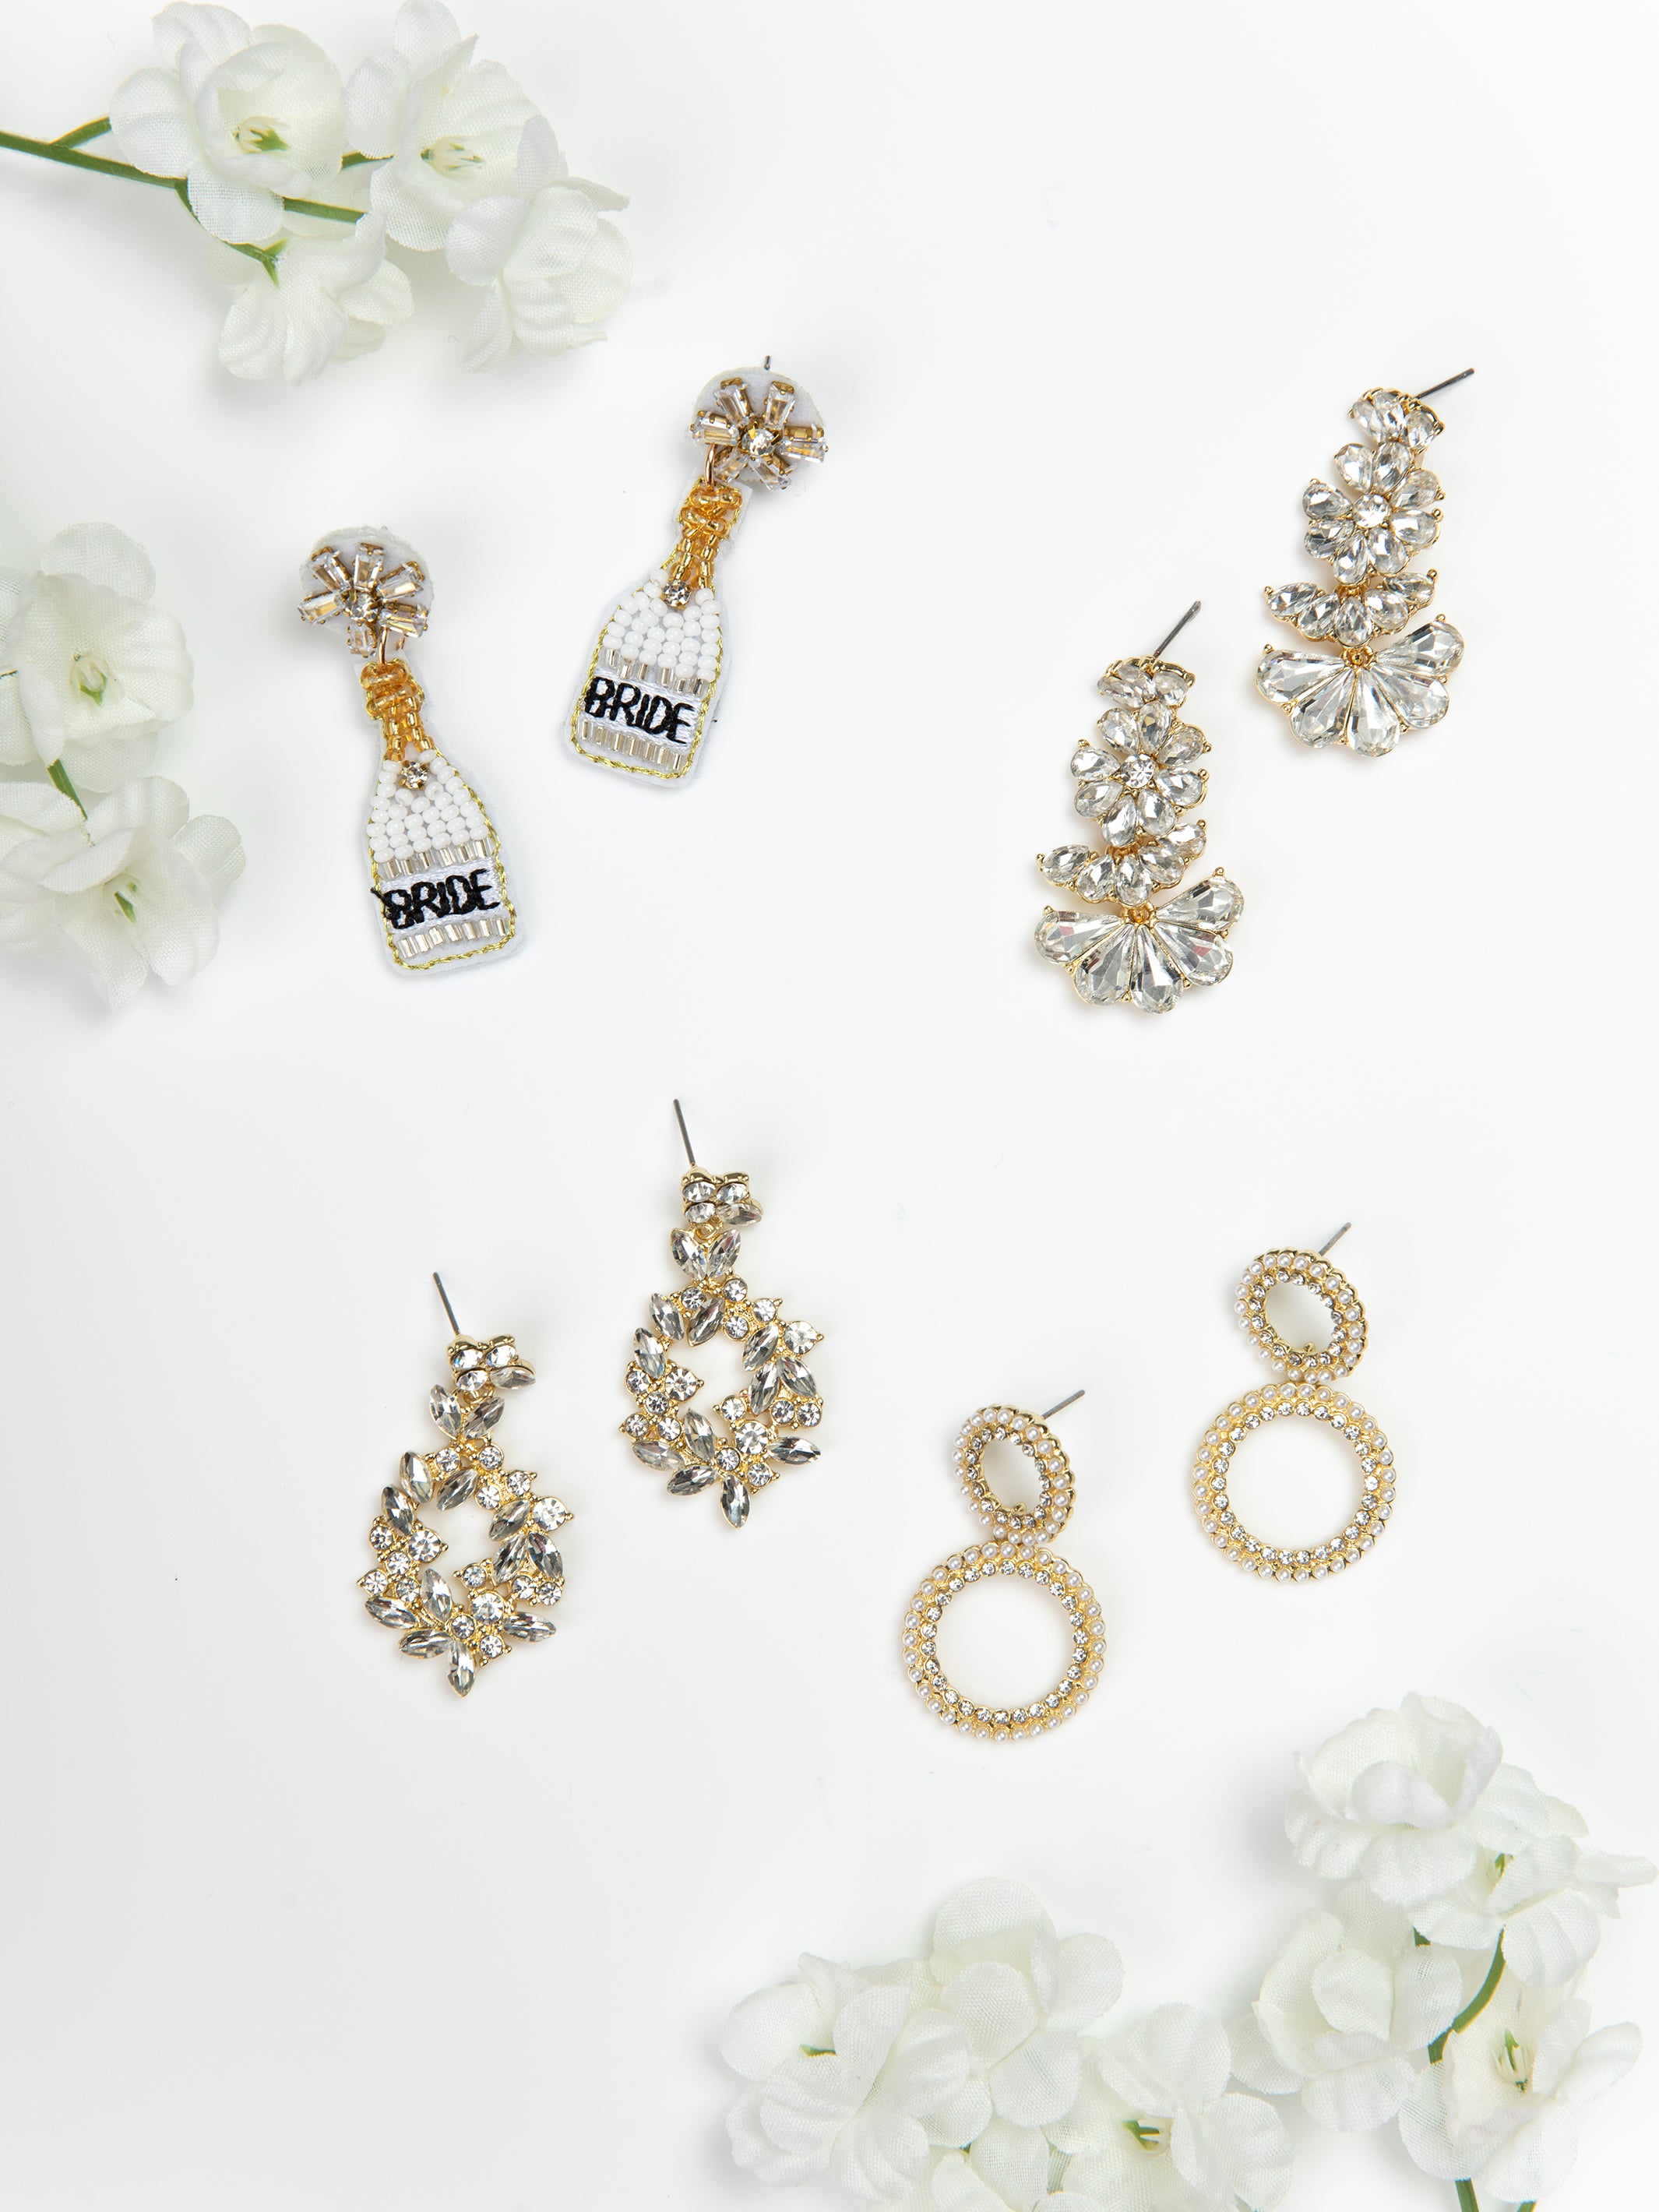 The Wedding Jewelry Collection by Michelle McDowell | Women's Jewelry ...